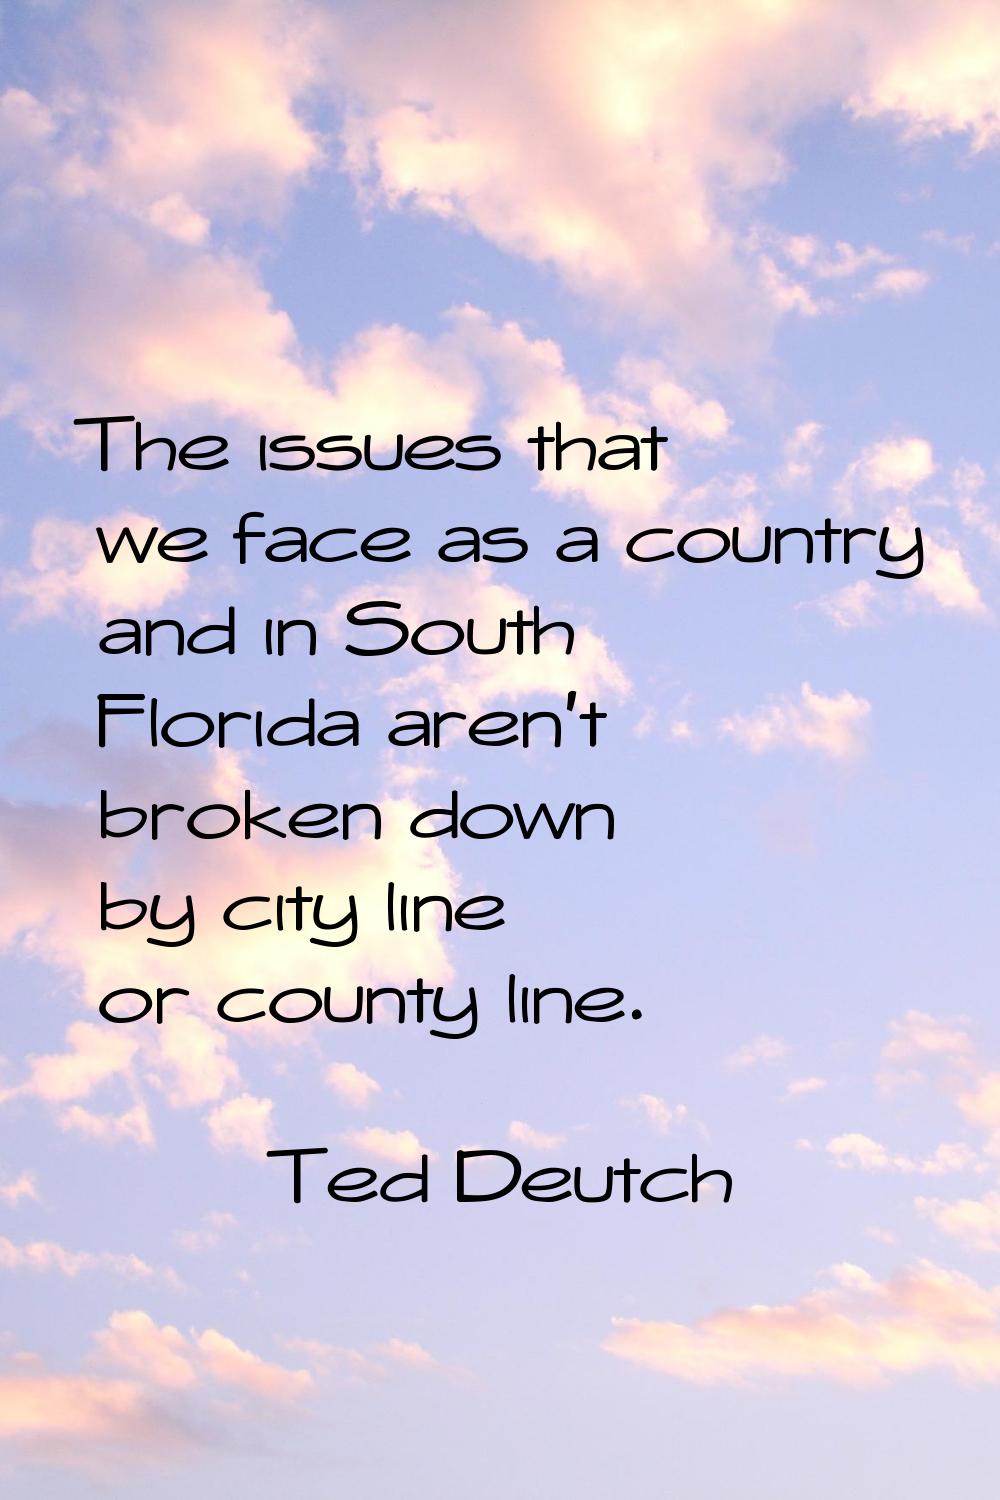 The issues that we face as a country and in South Florida aren't broken down by city line or county